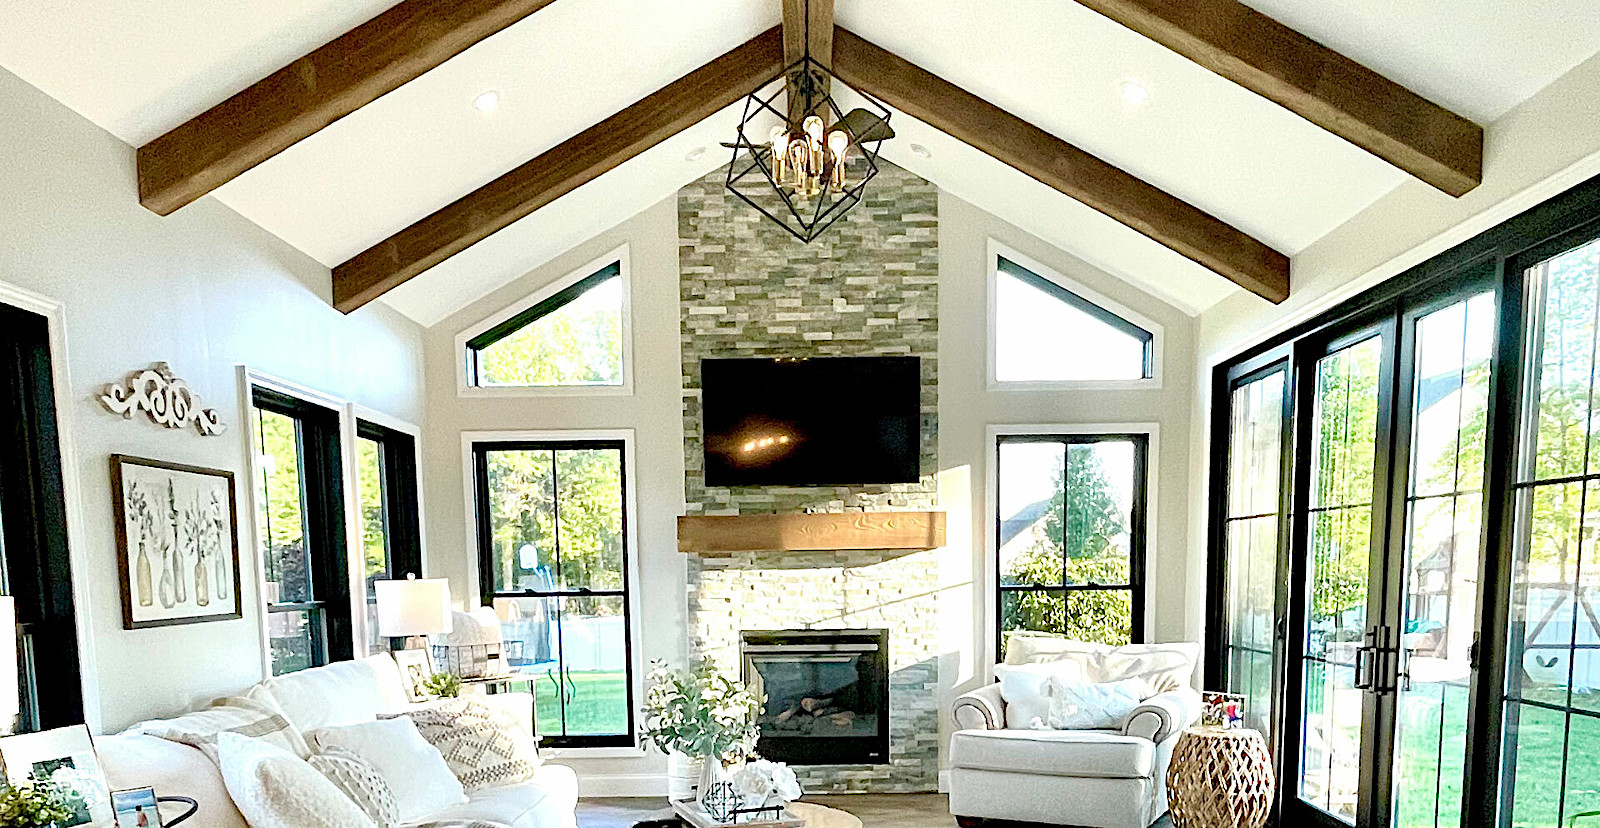 Cost-effective faux wood beams